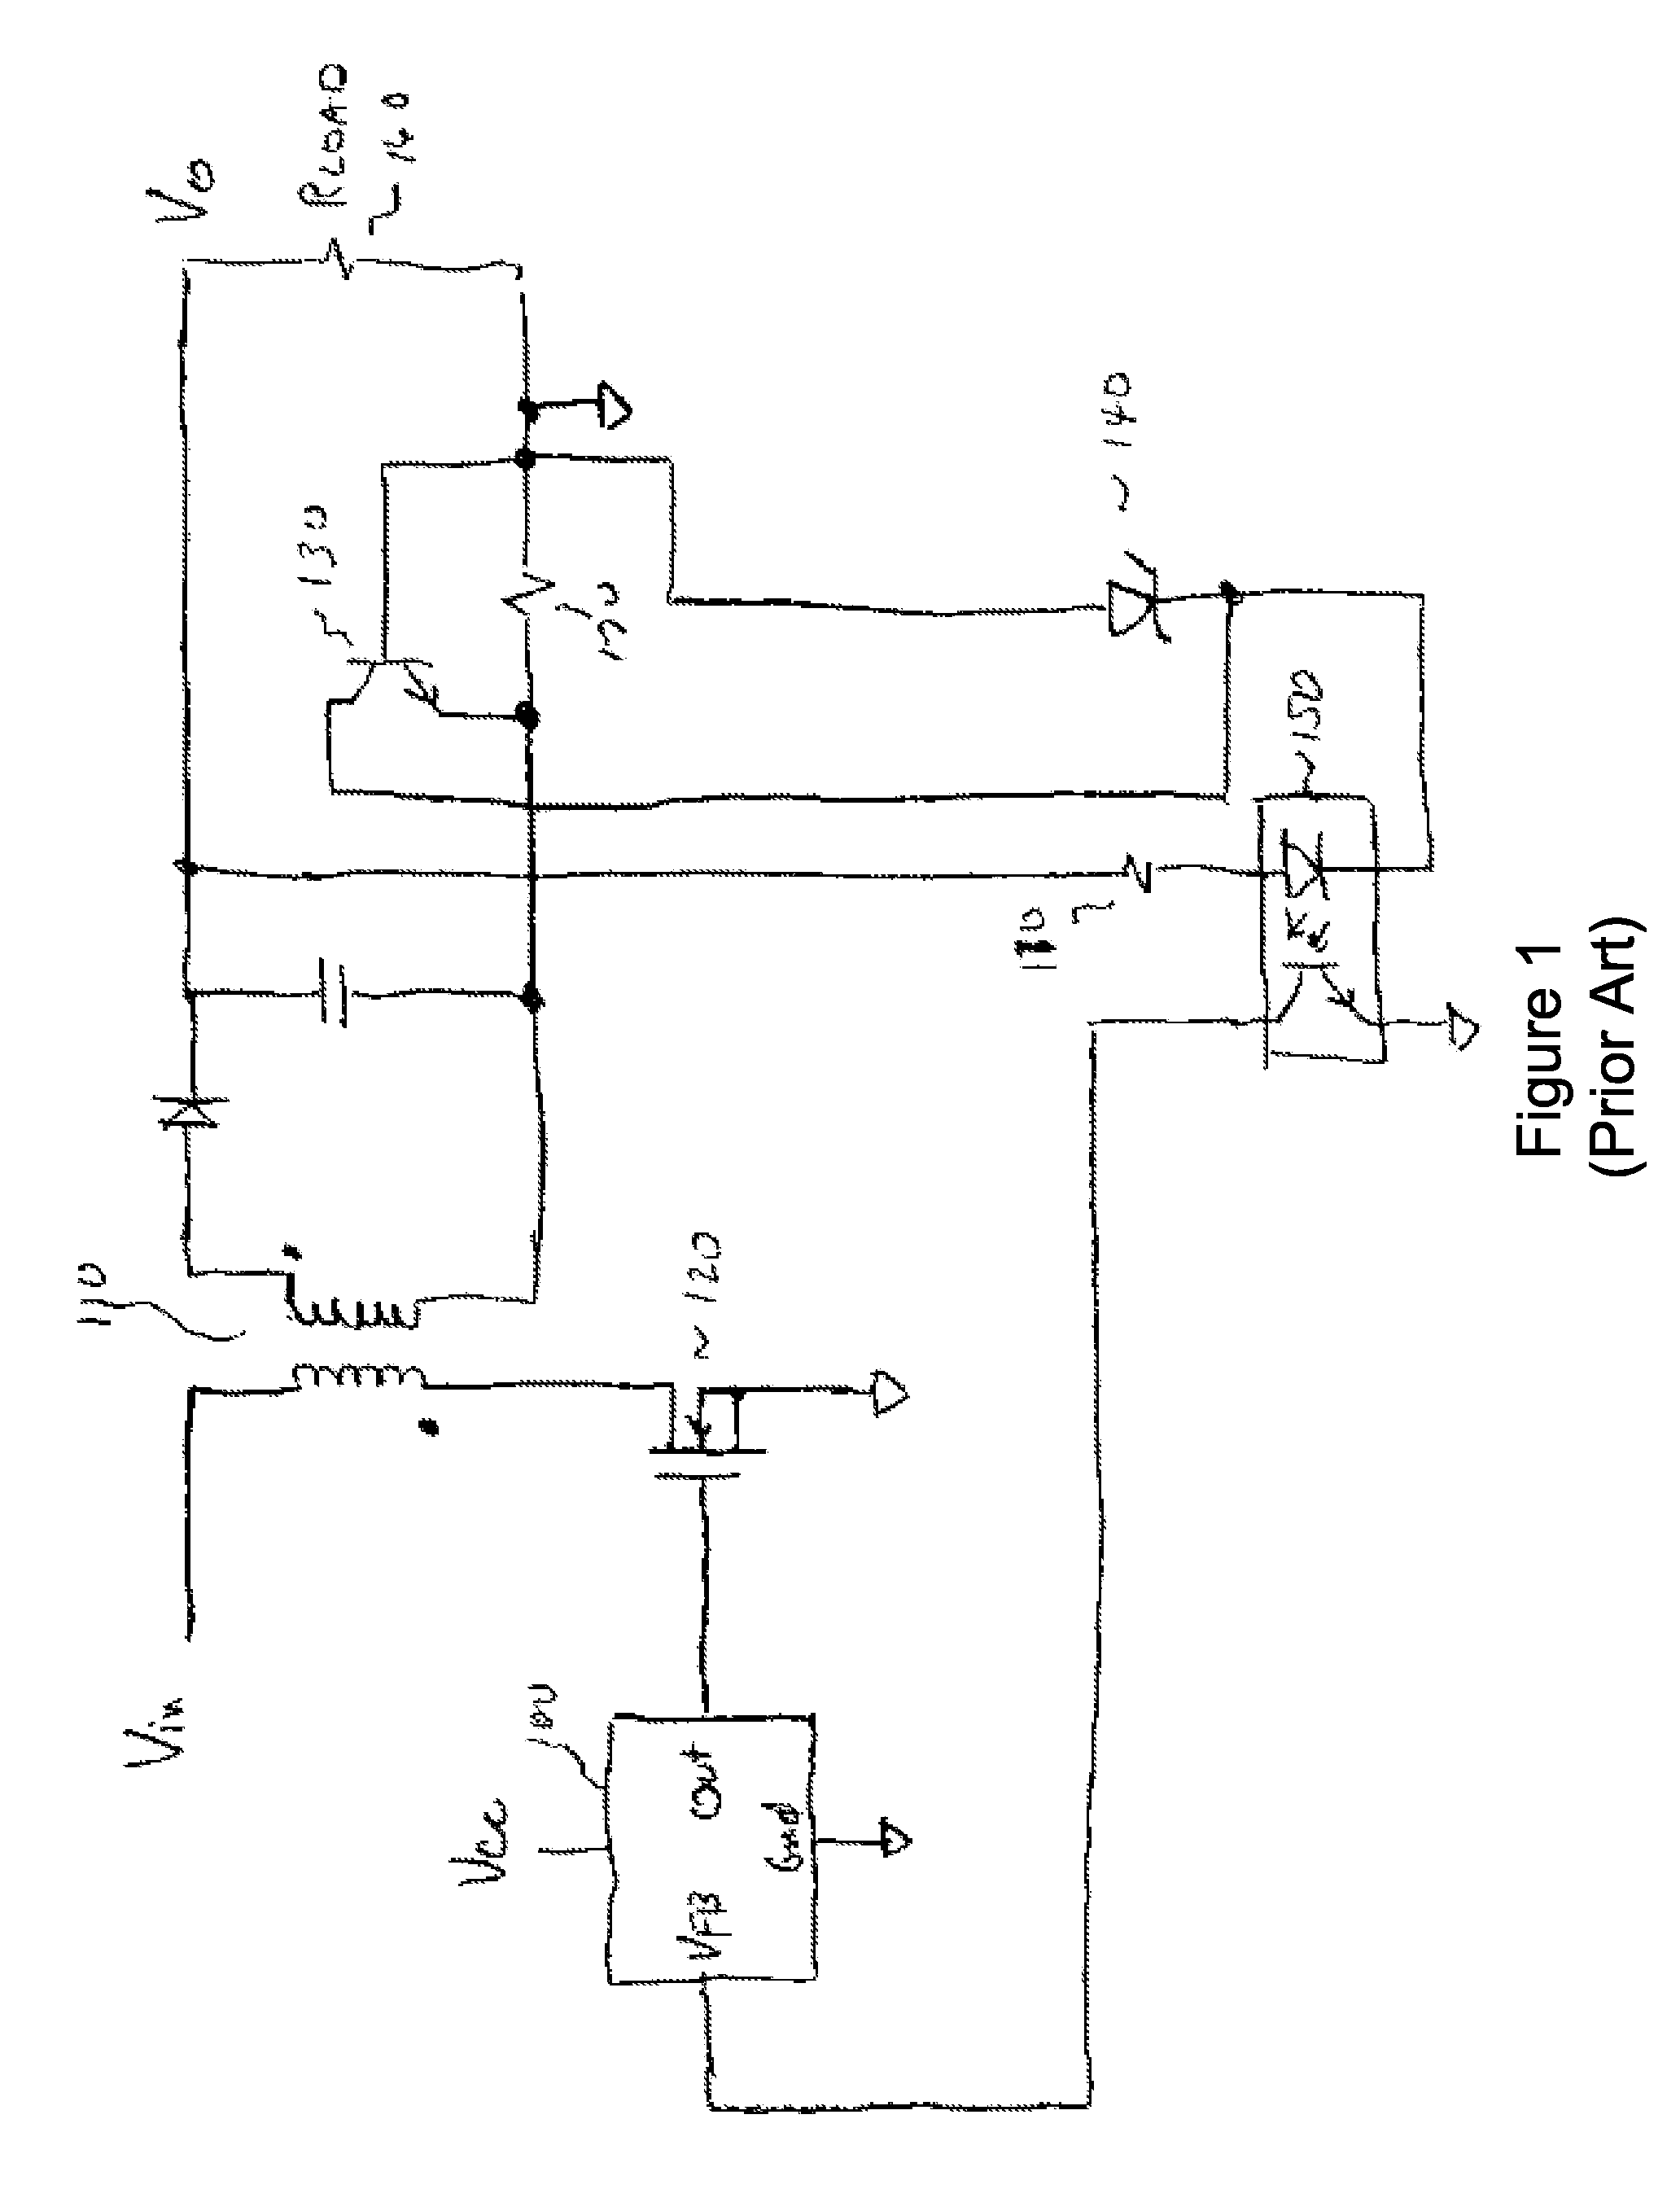 On-Time Control For Constant Current Mode In A Flyback Power Supply